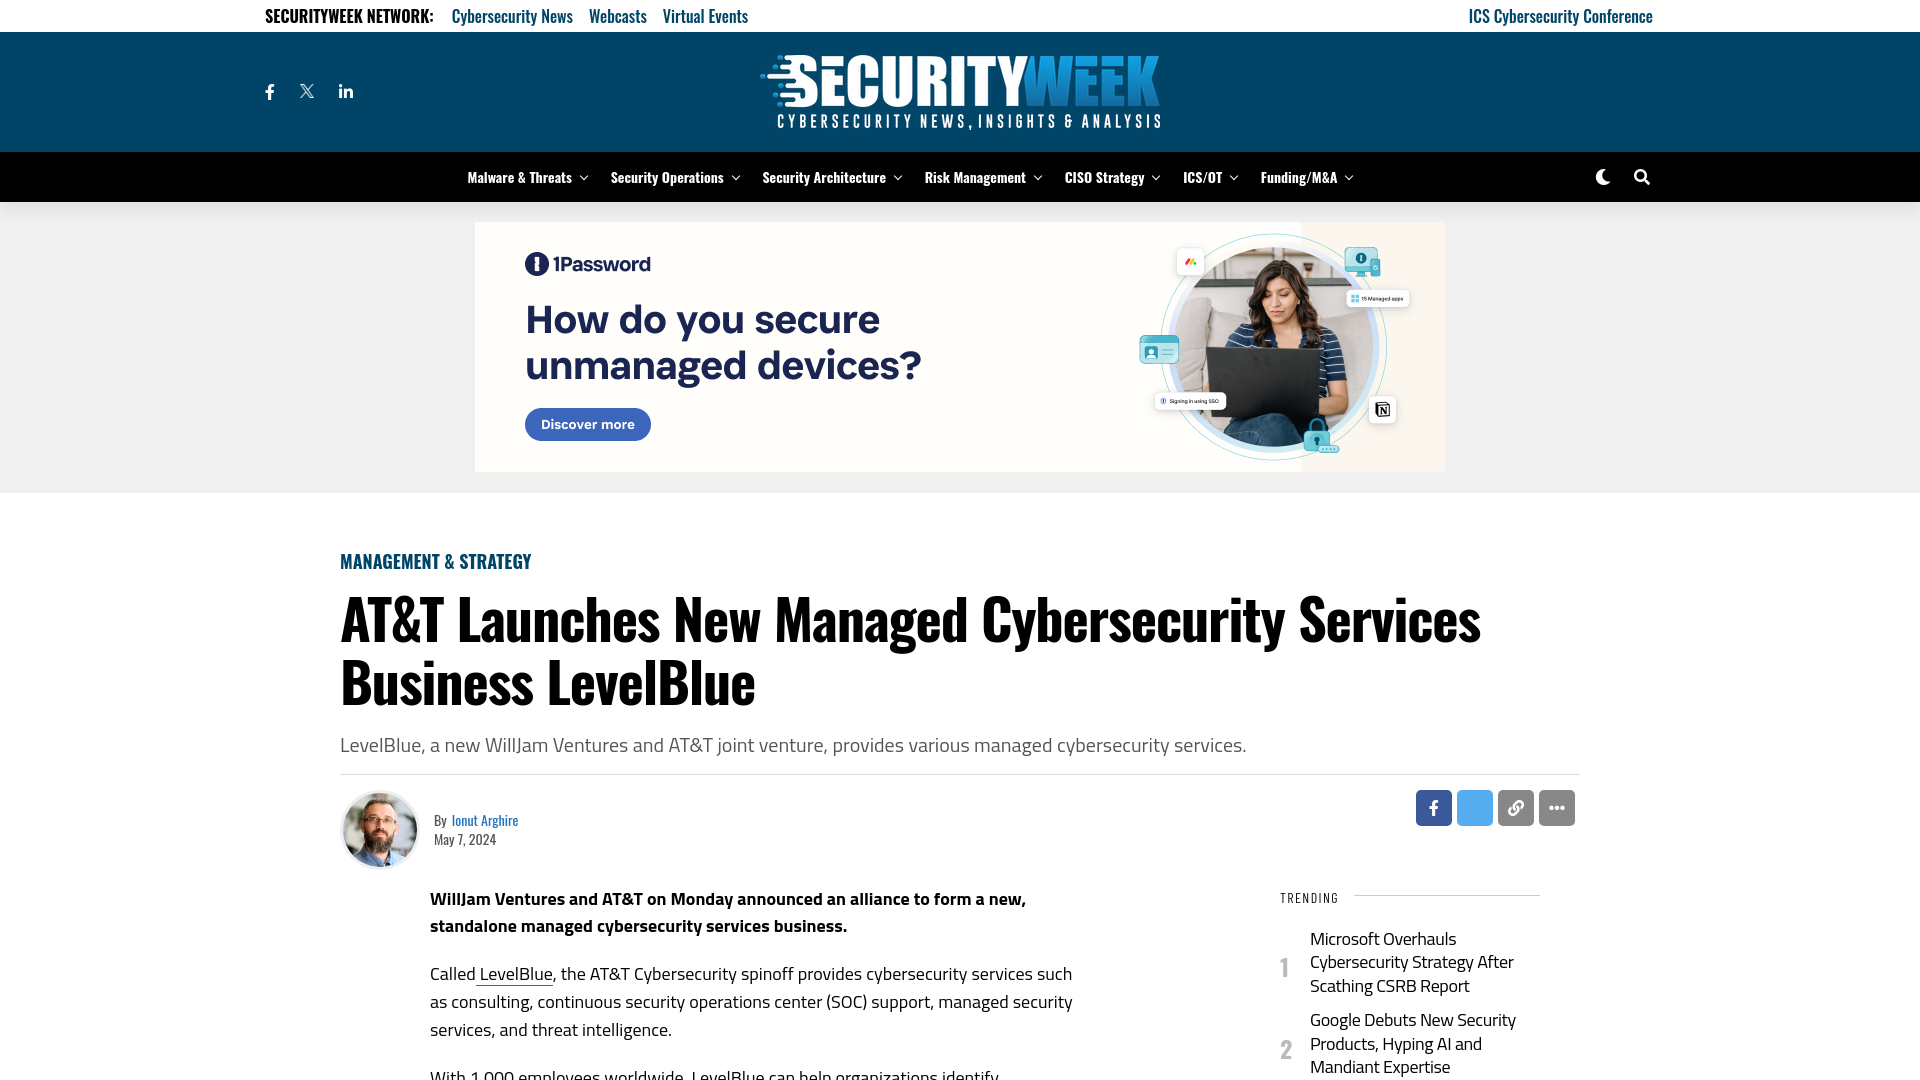 AT&T Launches New Managed Cybersecurity Services Business LevelBlue - SecurityWeek